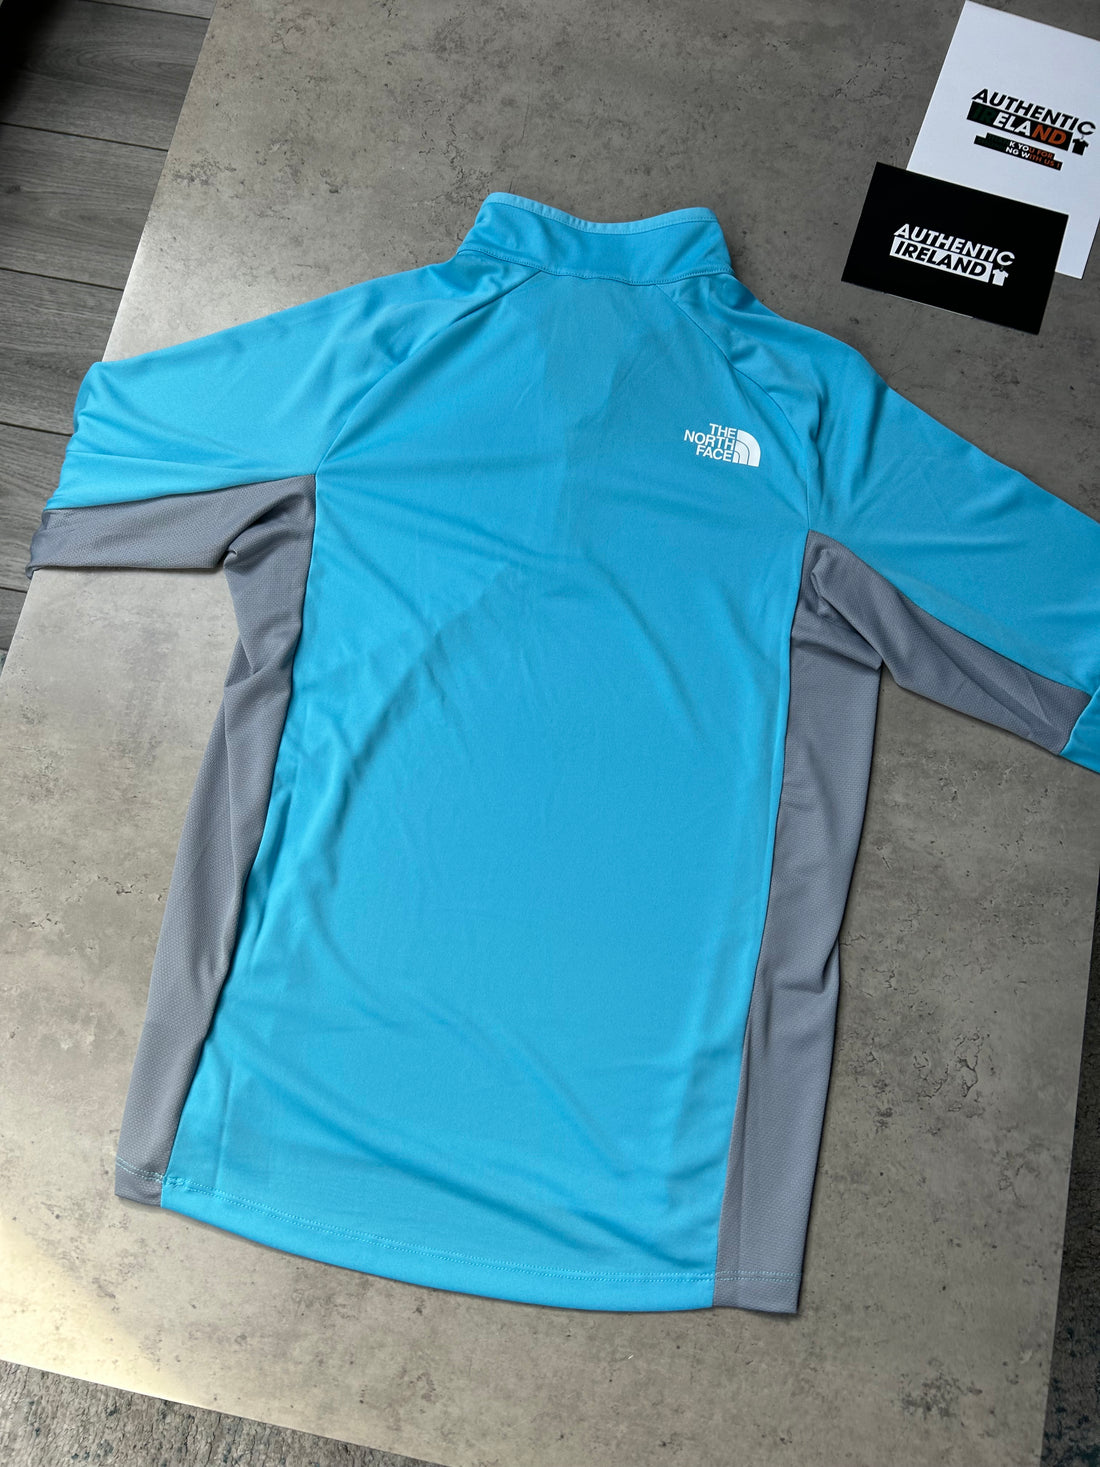 THE NORTH FACE 1/4 ZIP SET - BABY BLUE/GREY